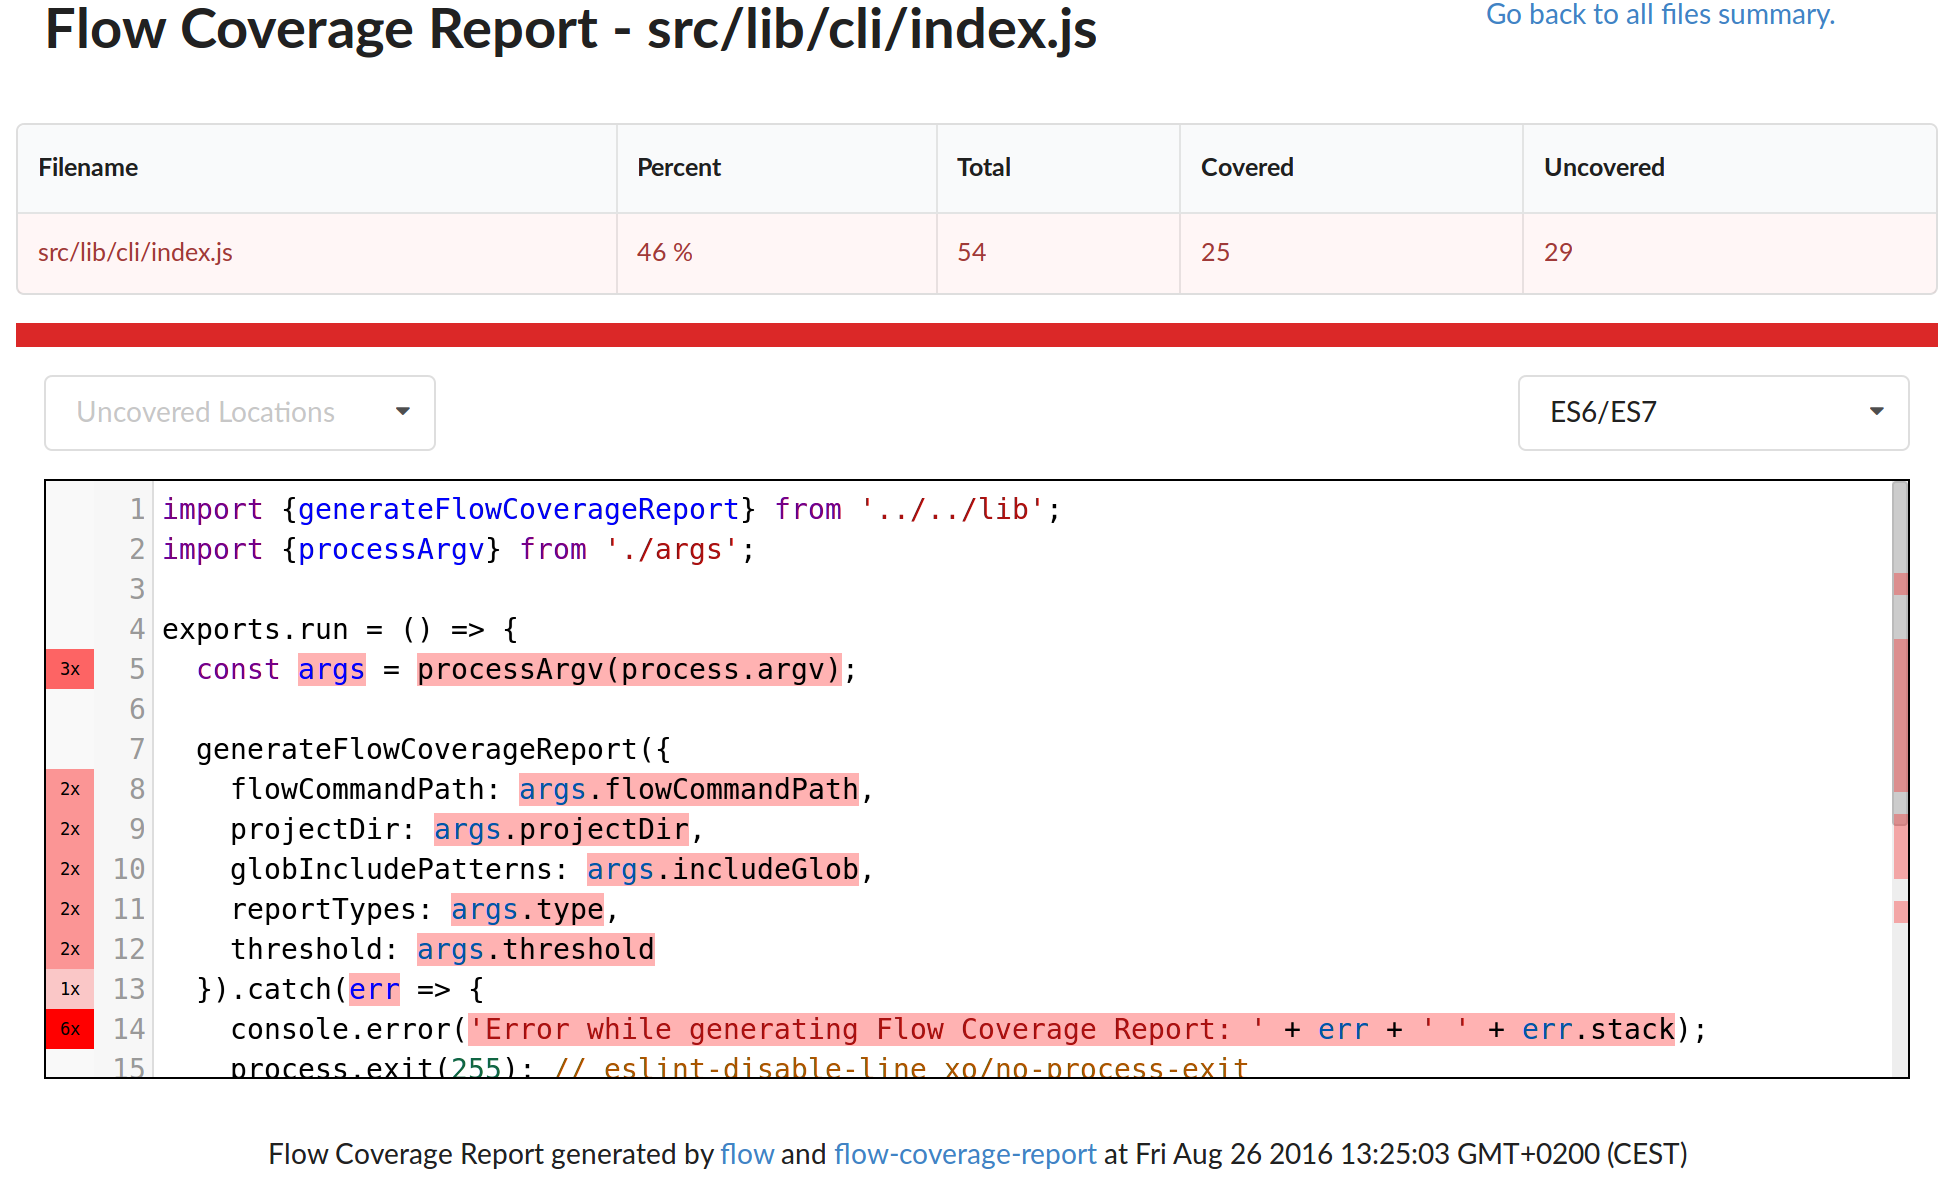 Screenshot flow coverage report sourcefile